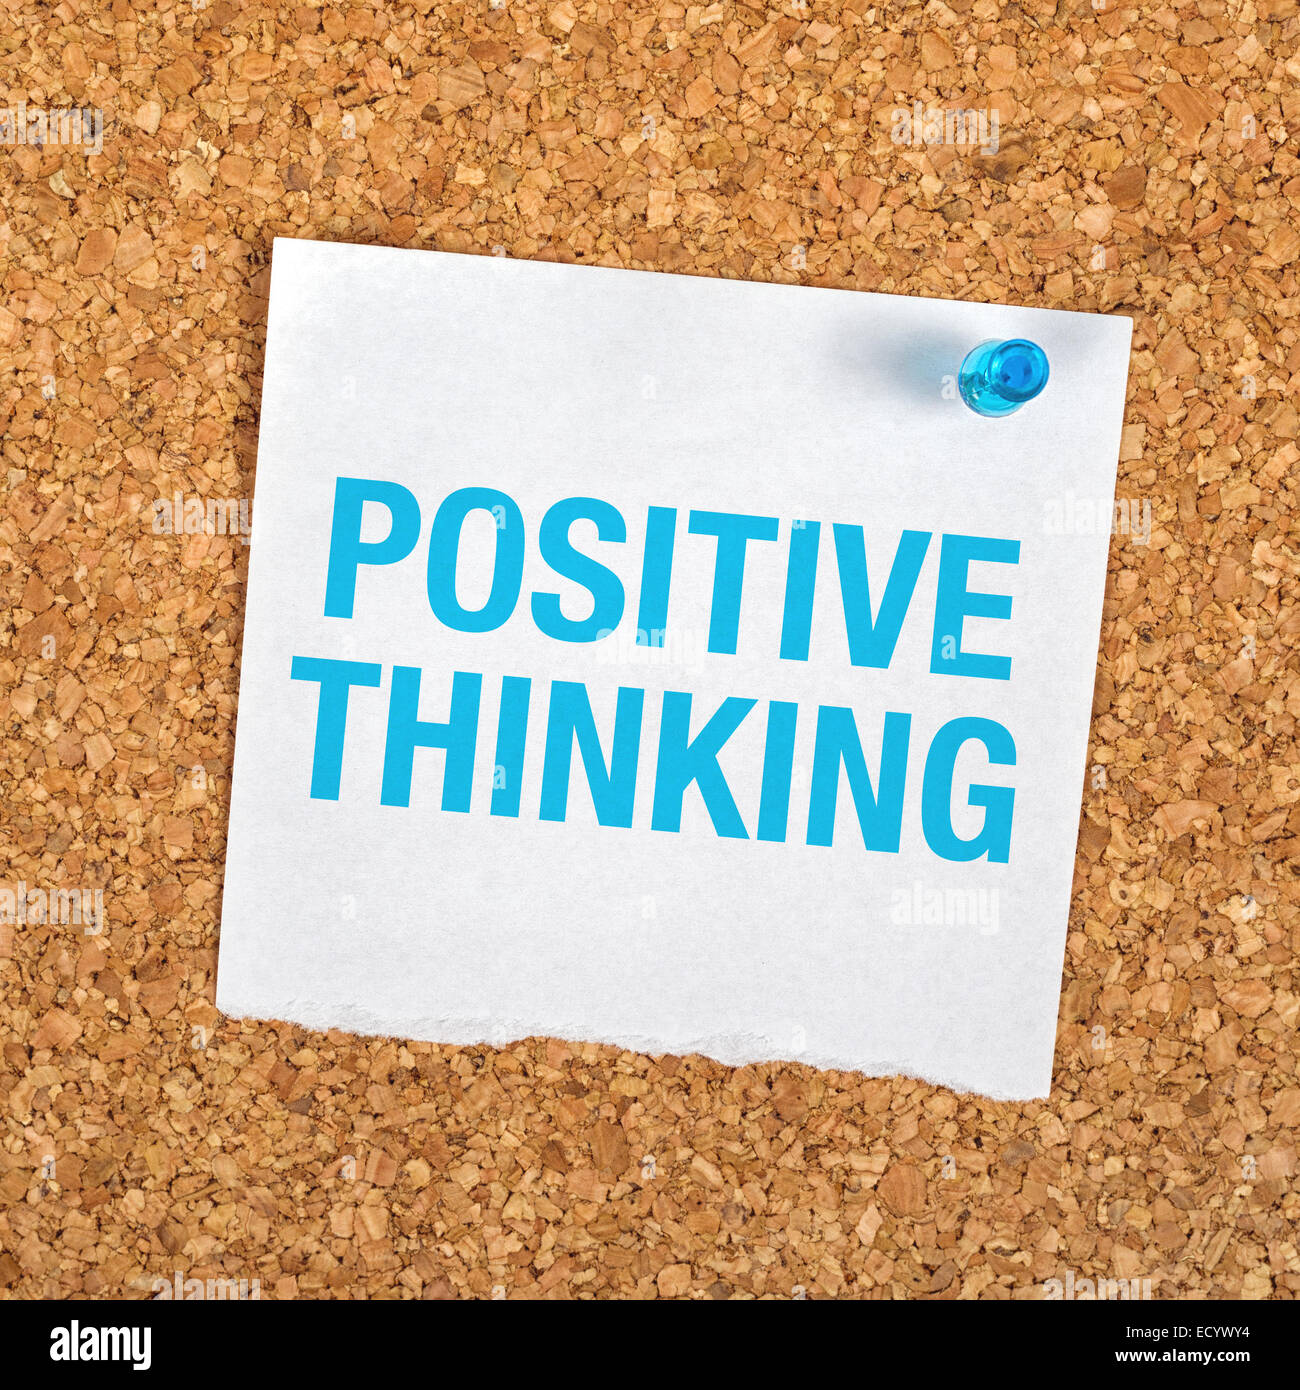 Positive Thinking Reminder Note Message on Paper Pinned to a Cork Bulletin Board. Stock Photo